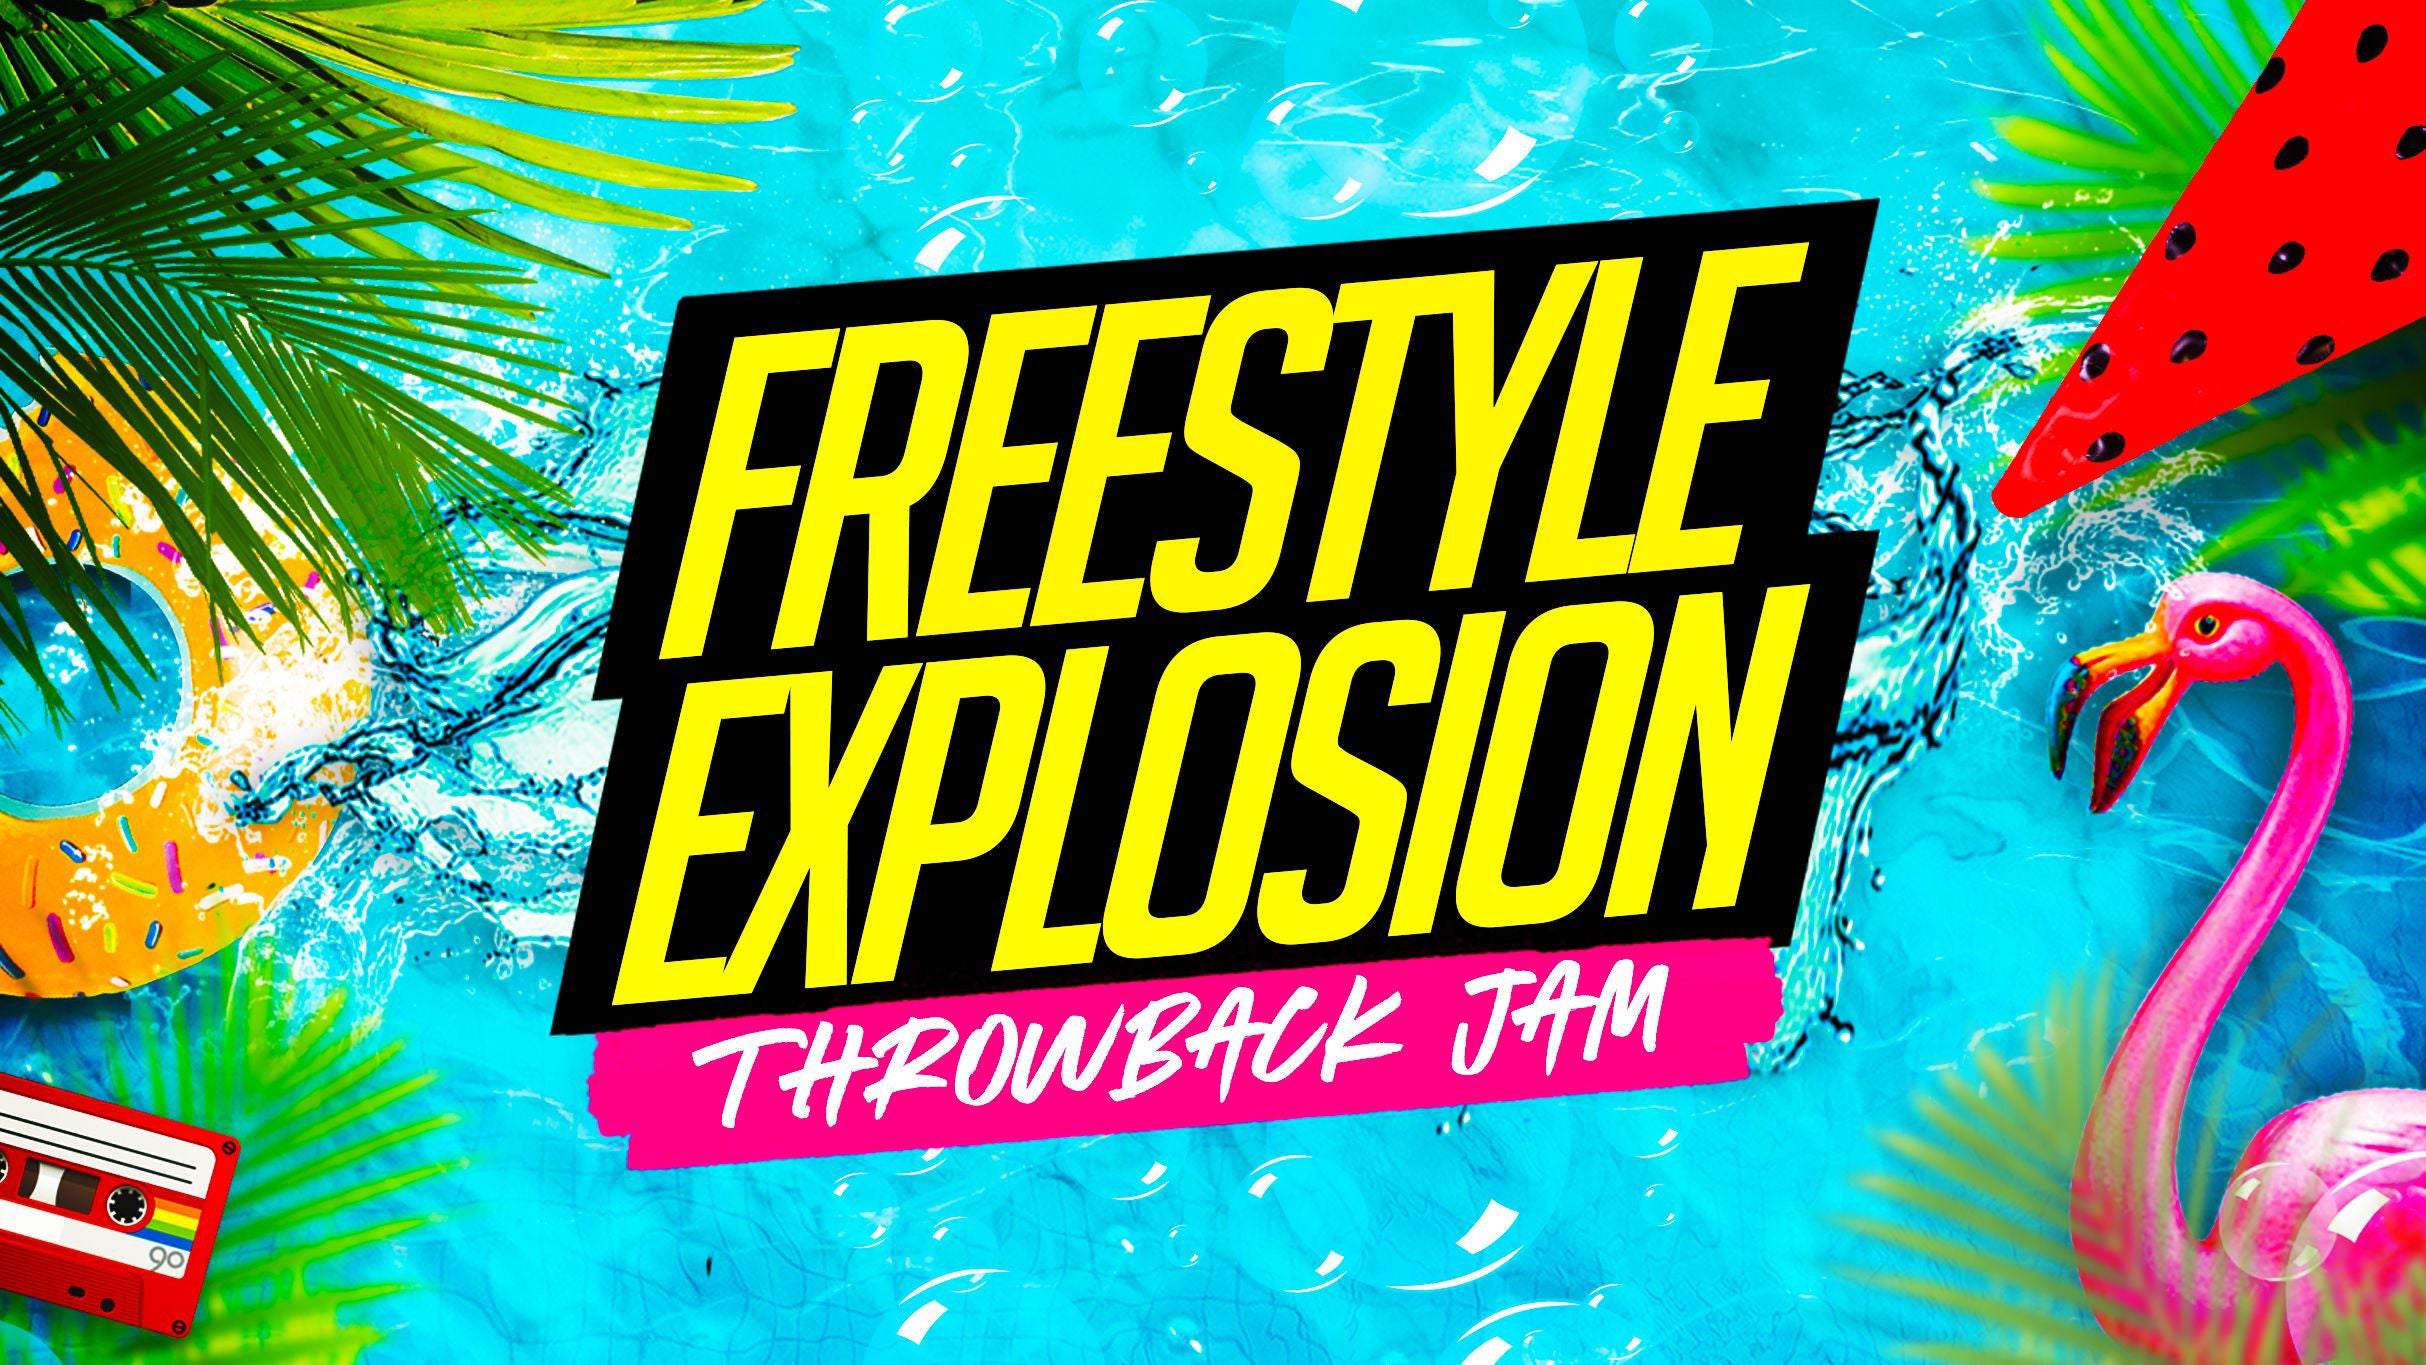 Freestyle Explosion Throwback Jam pre-sale password for your tickets in Orlando